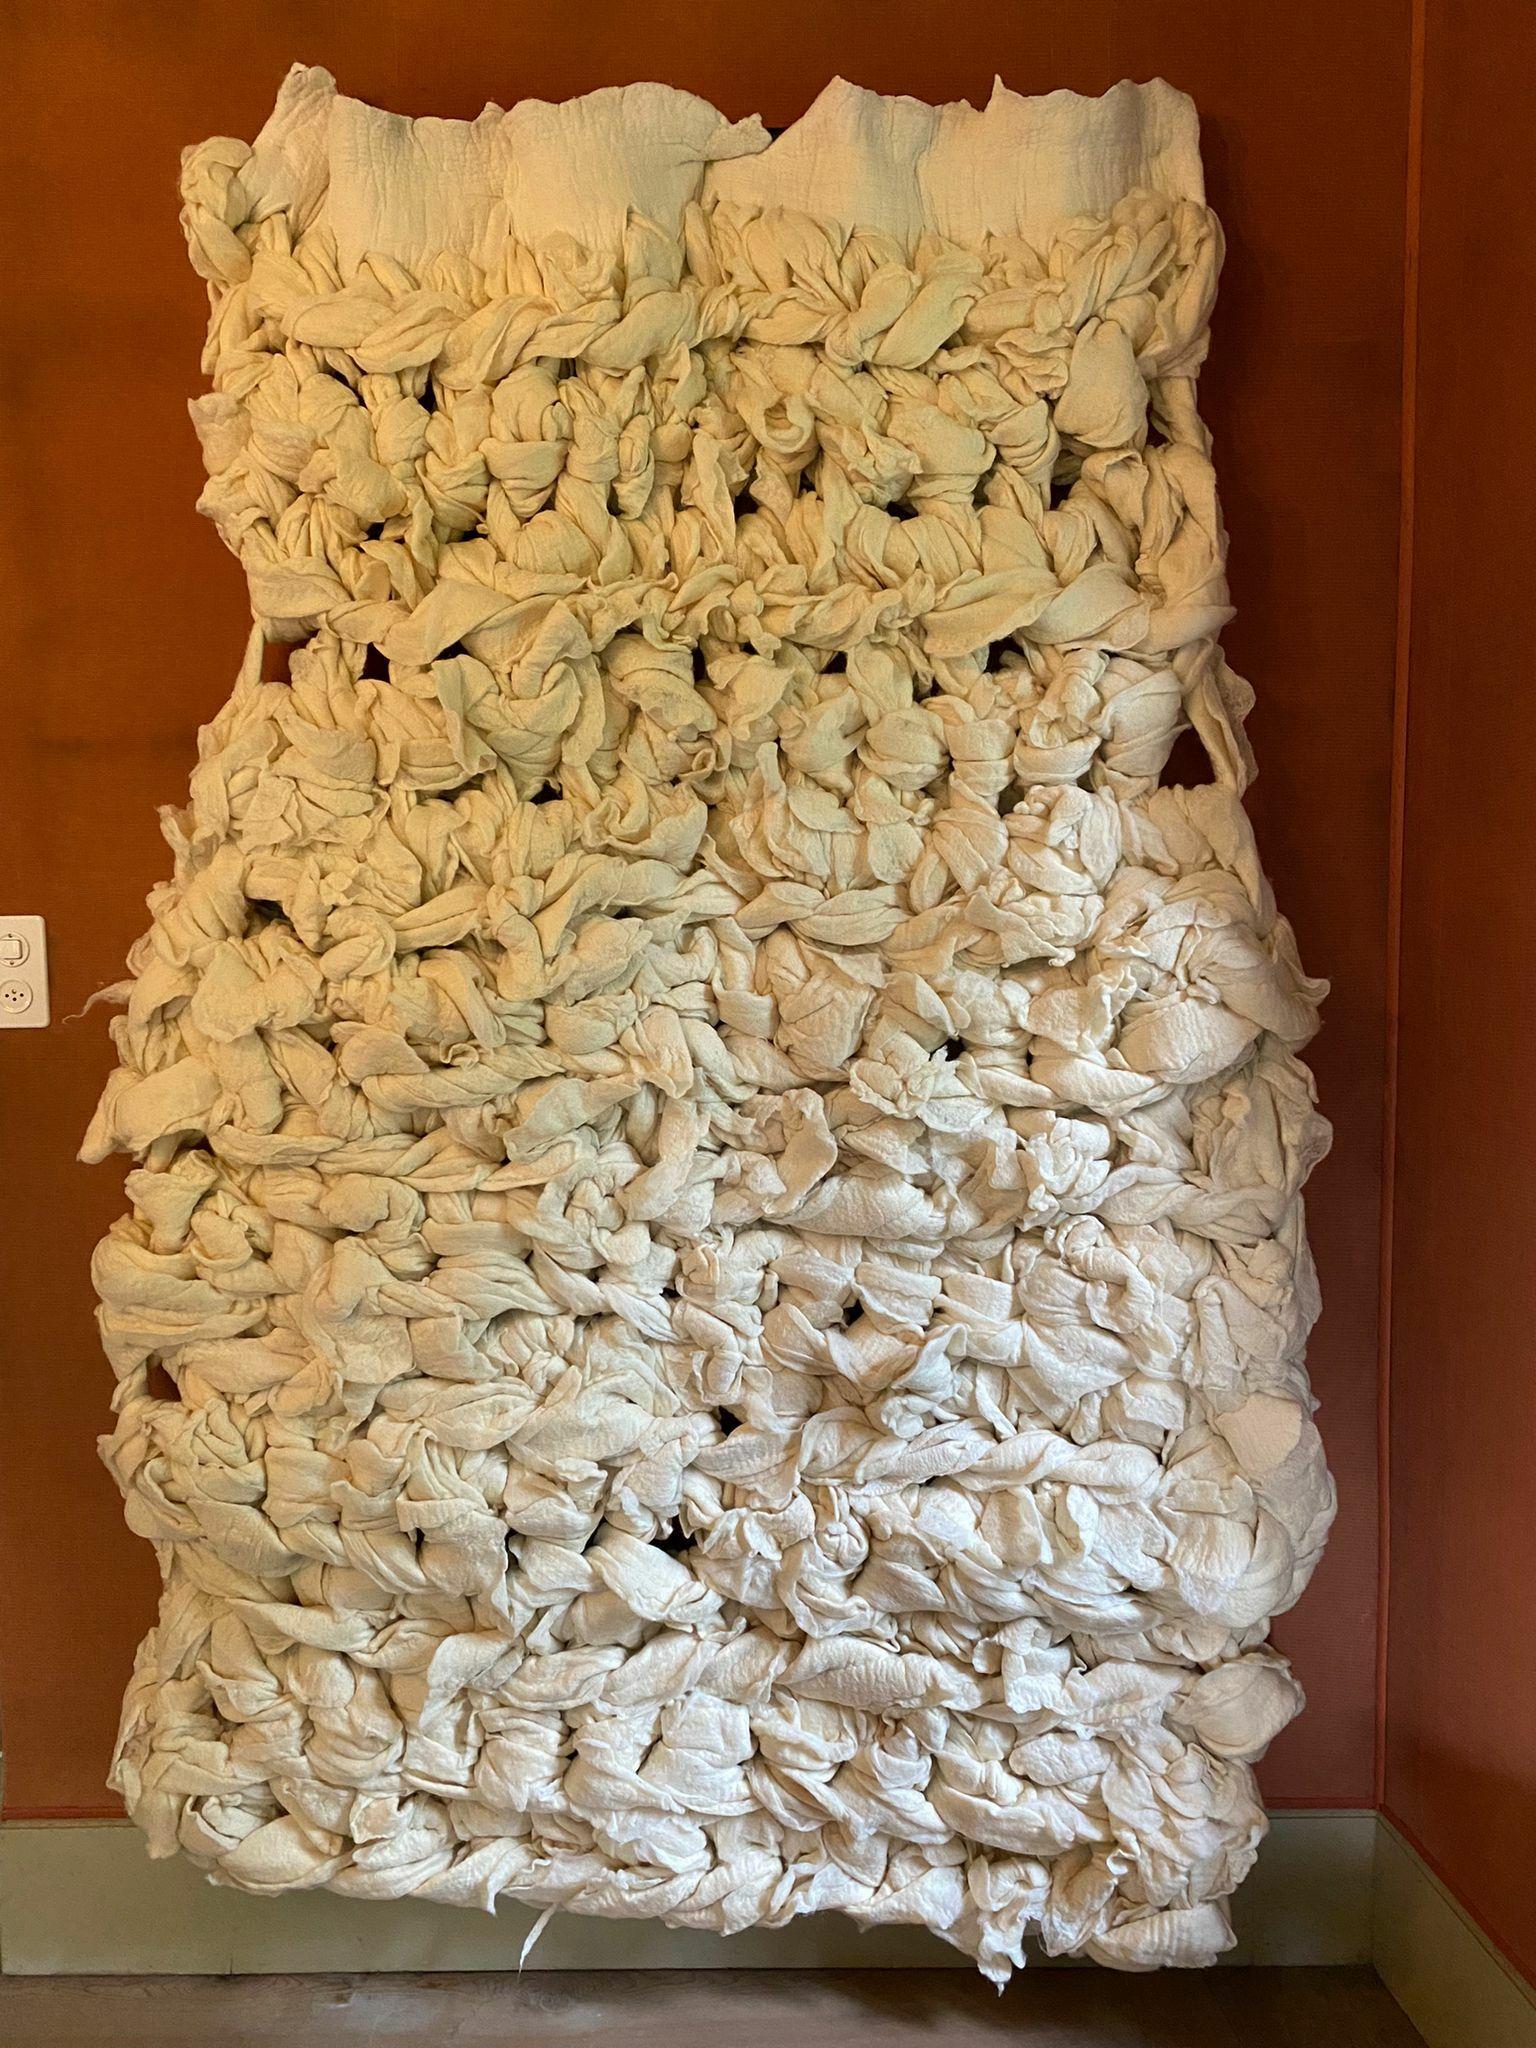 Knotted Wall Tapestry in Wool by Inês Schertel, Brazil, 2021

Ines Schertel's primary material is sheep's wool. As a practitioner of Slow Design, the artist takes a holistic approach to textile design, personally overseeing the whole process from